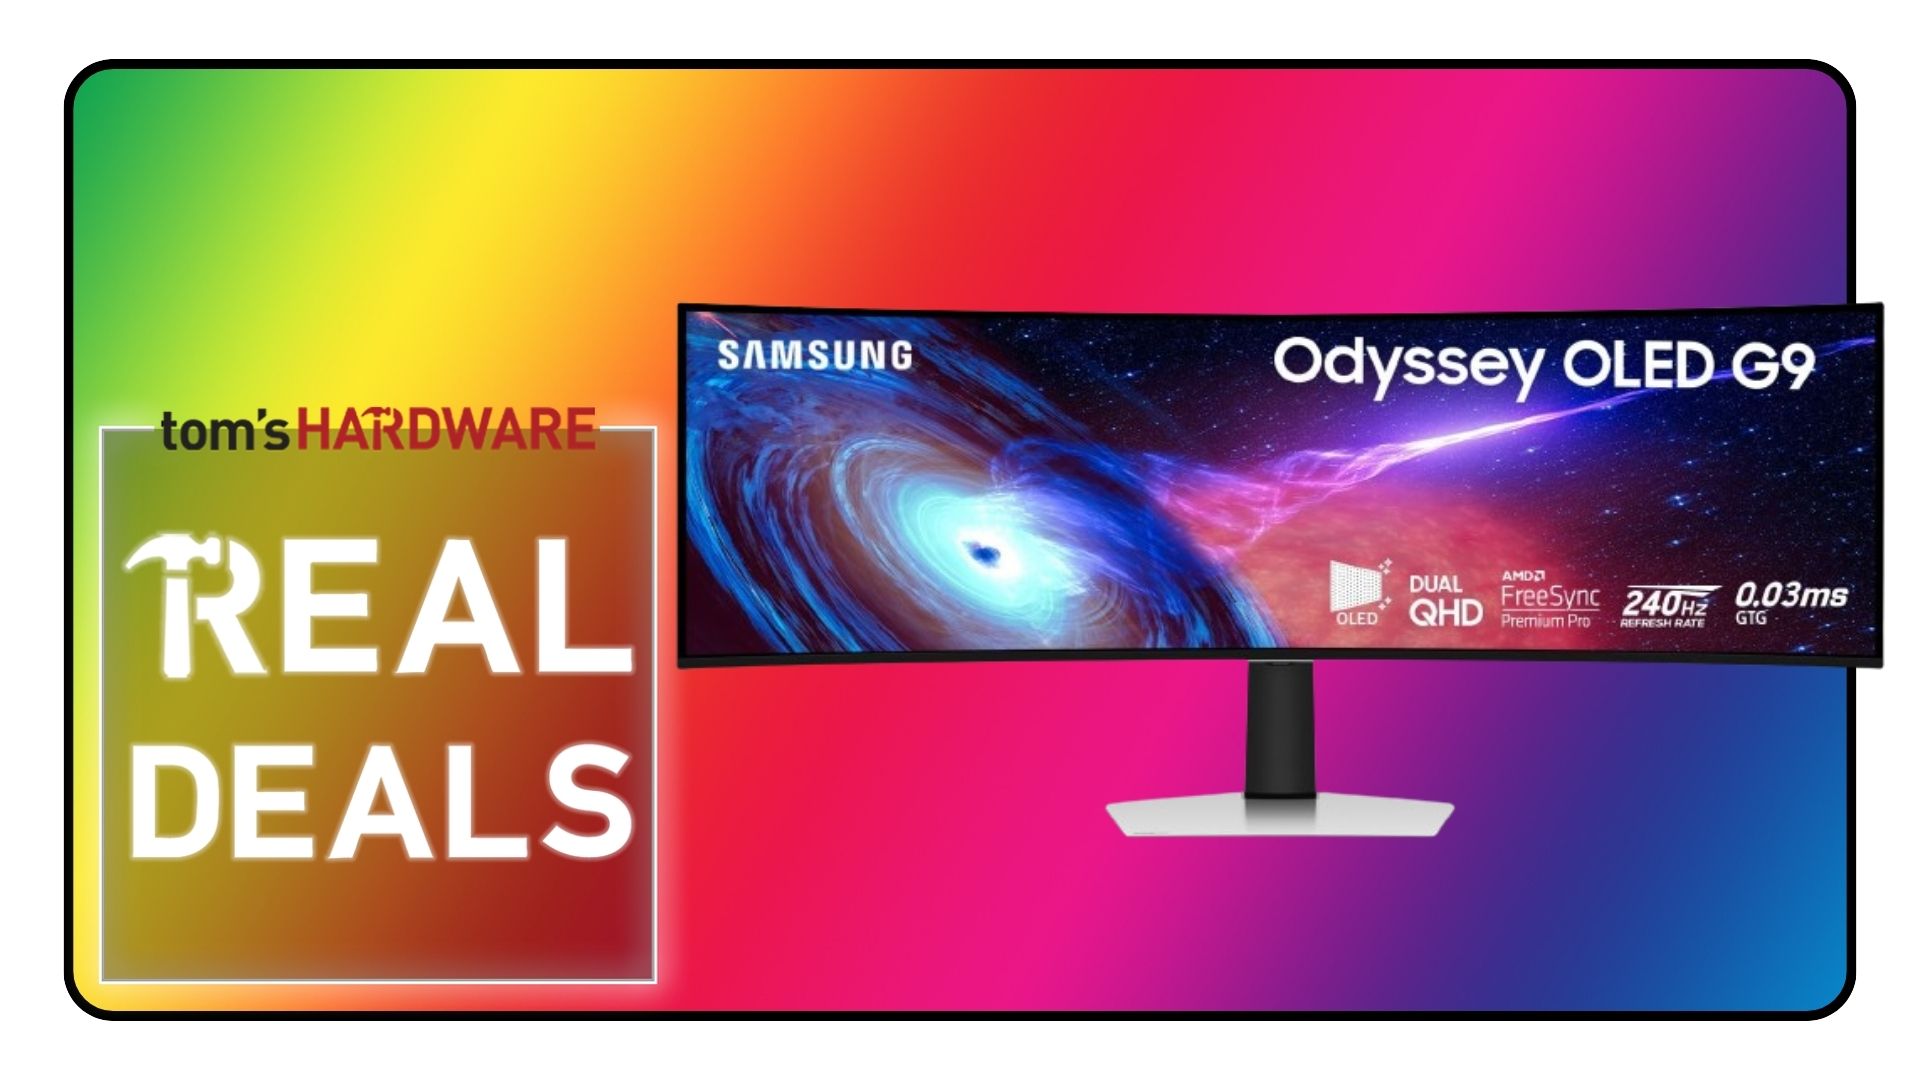 Samsung's 49-inch OLED monitor hits all-time-low — get $600 off this ultrawide monster screen